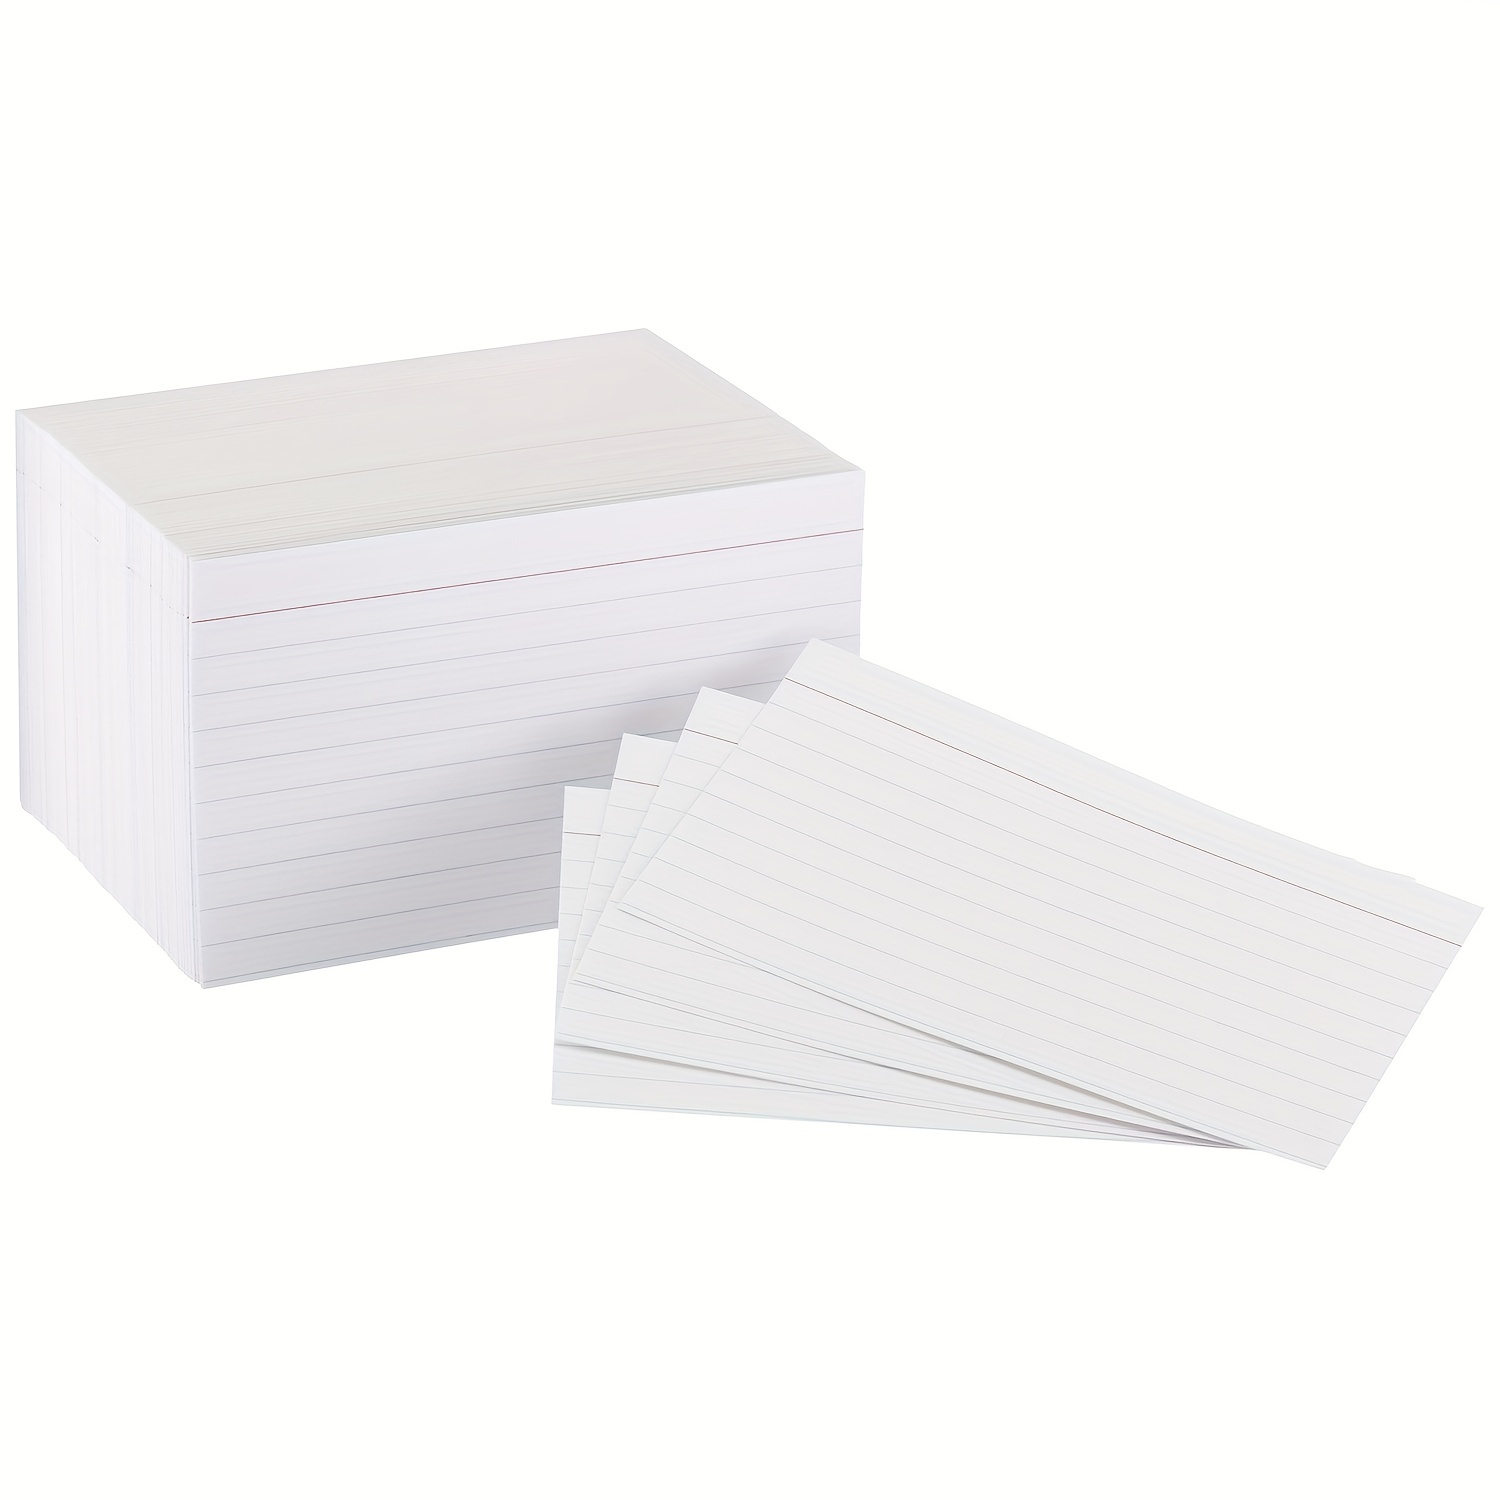 FindIt Tabbed Index Cards for Office Organization - Pack of 36 White Index  Card Dividers - College Supplies, 4x6 Inches